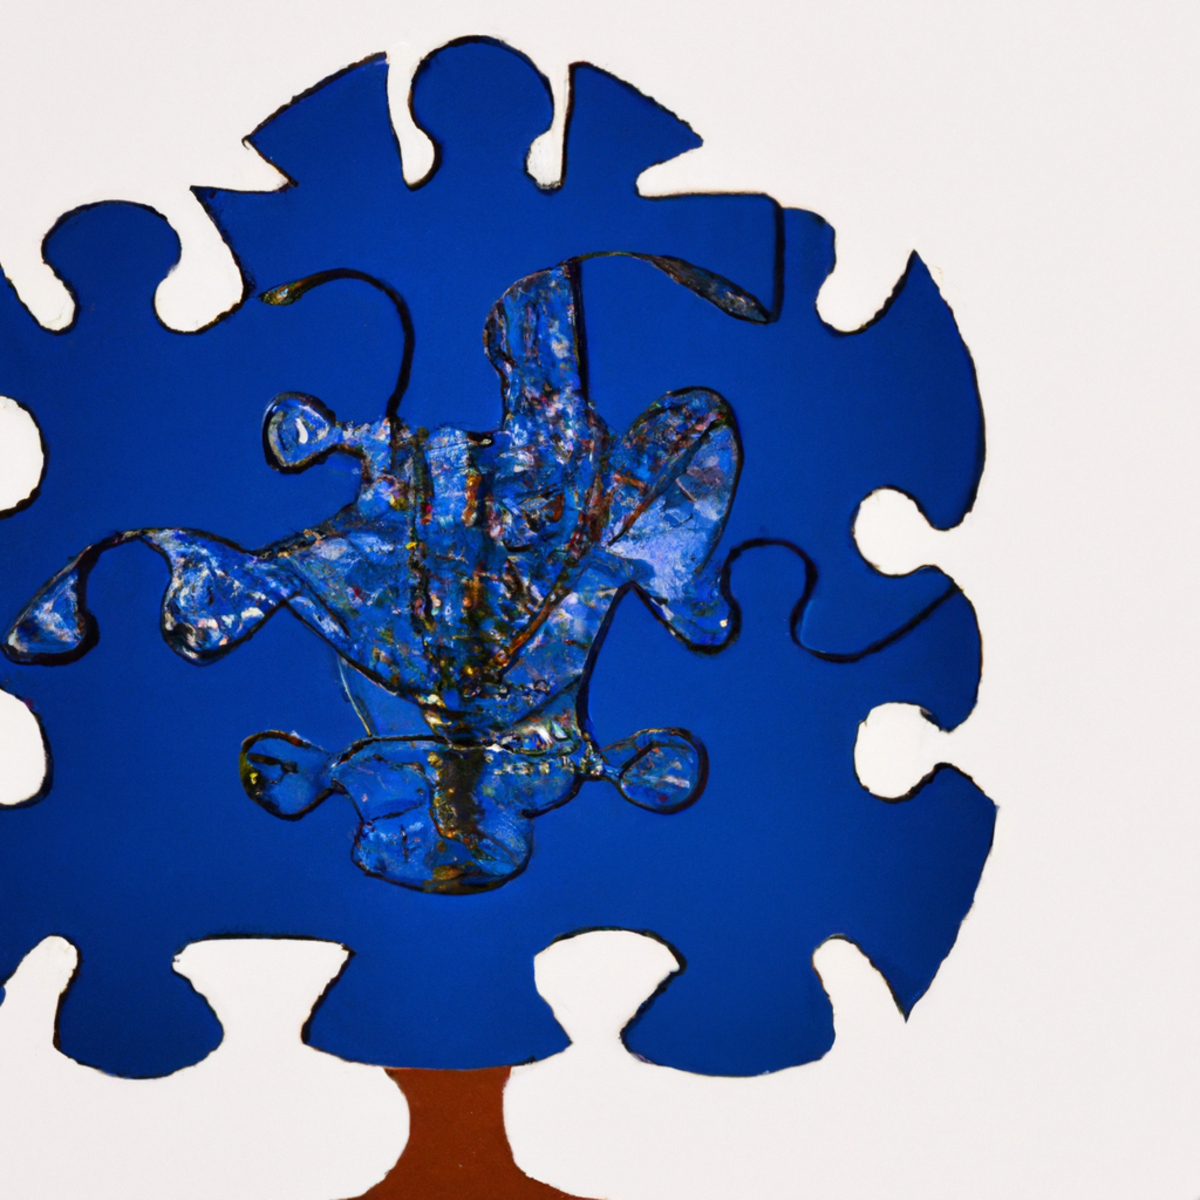 Symbolic image of strength and resilience: interlocked puzzle pieces, sturdy oak tree, and shining lighthouse.